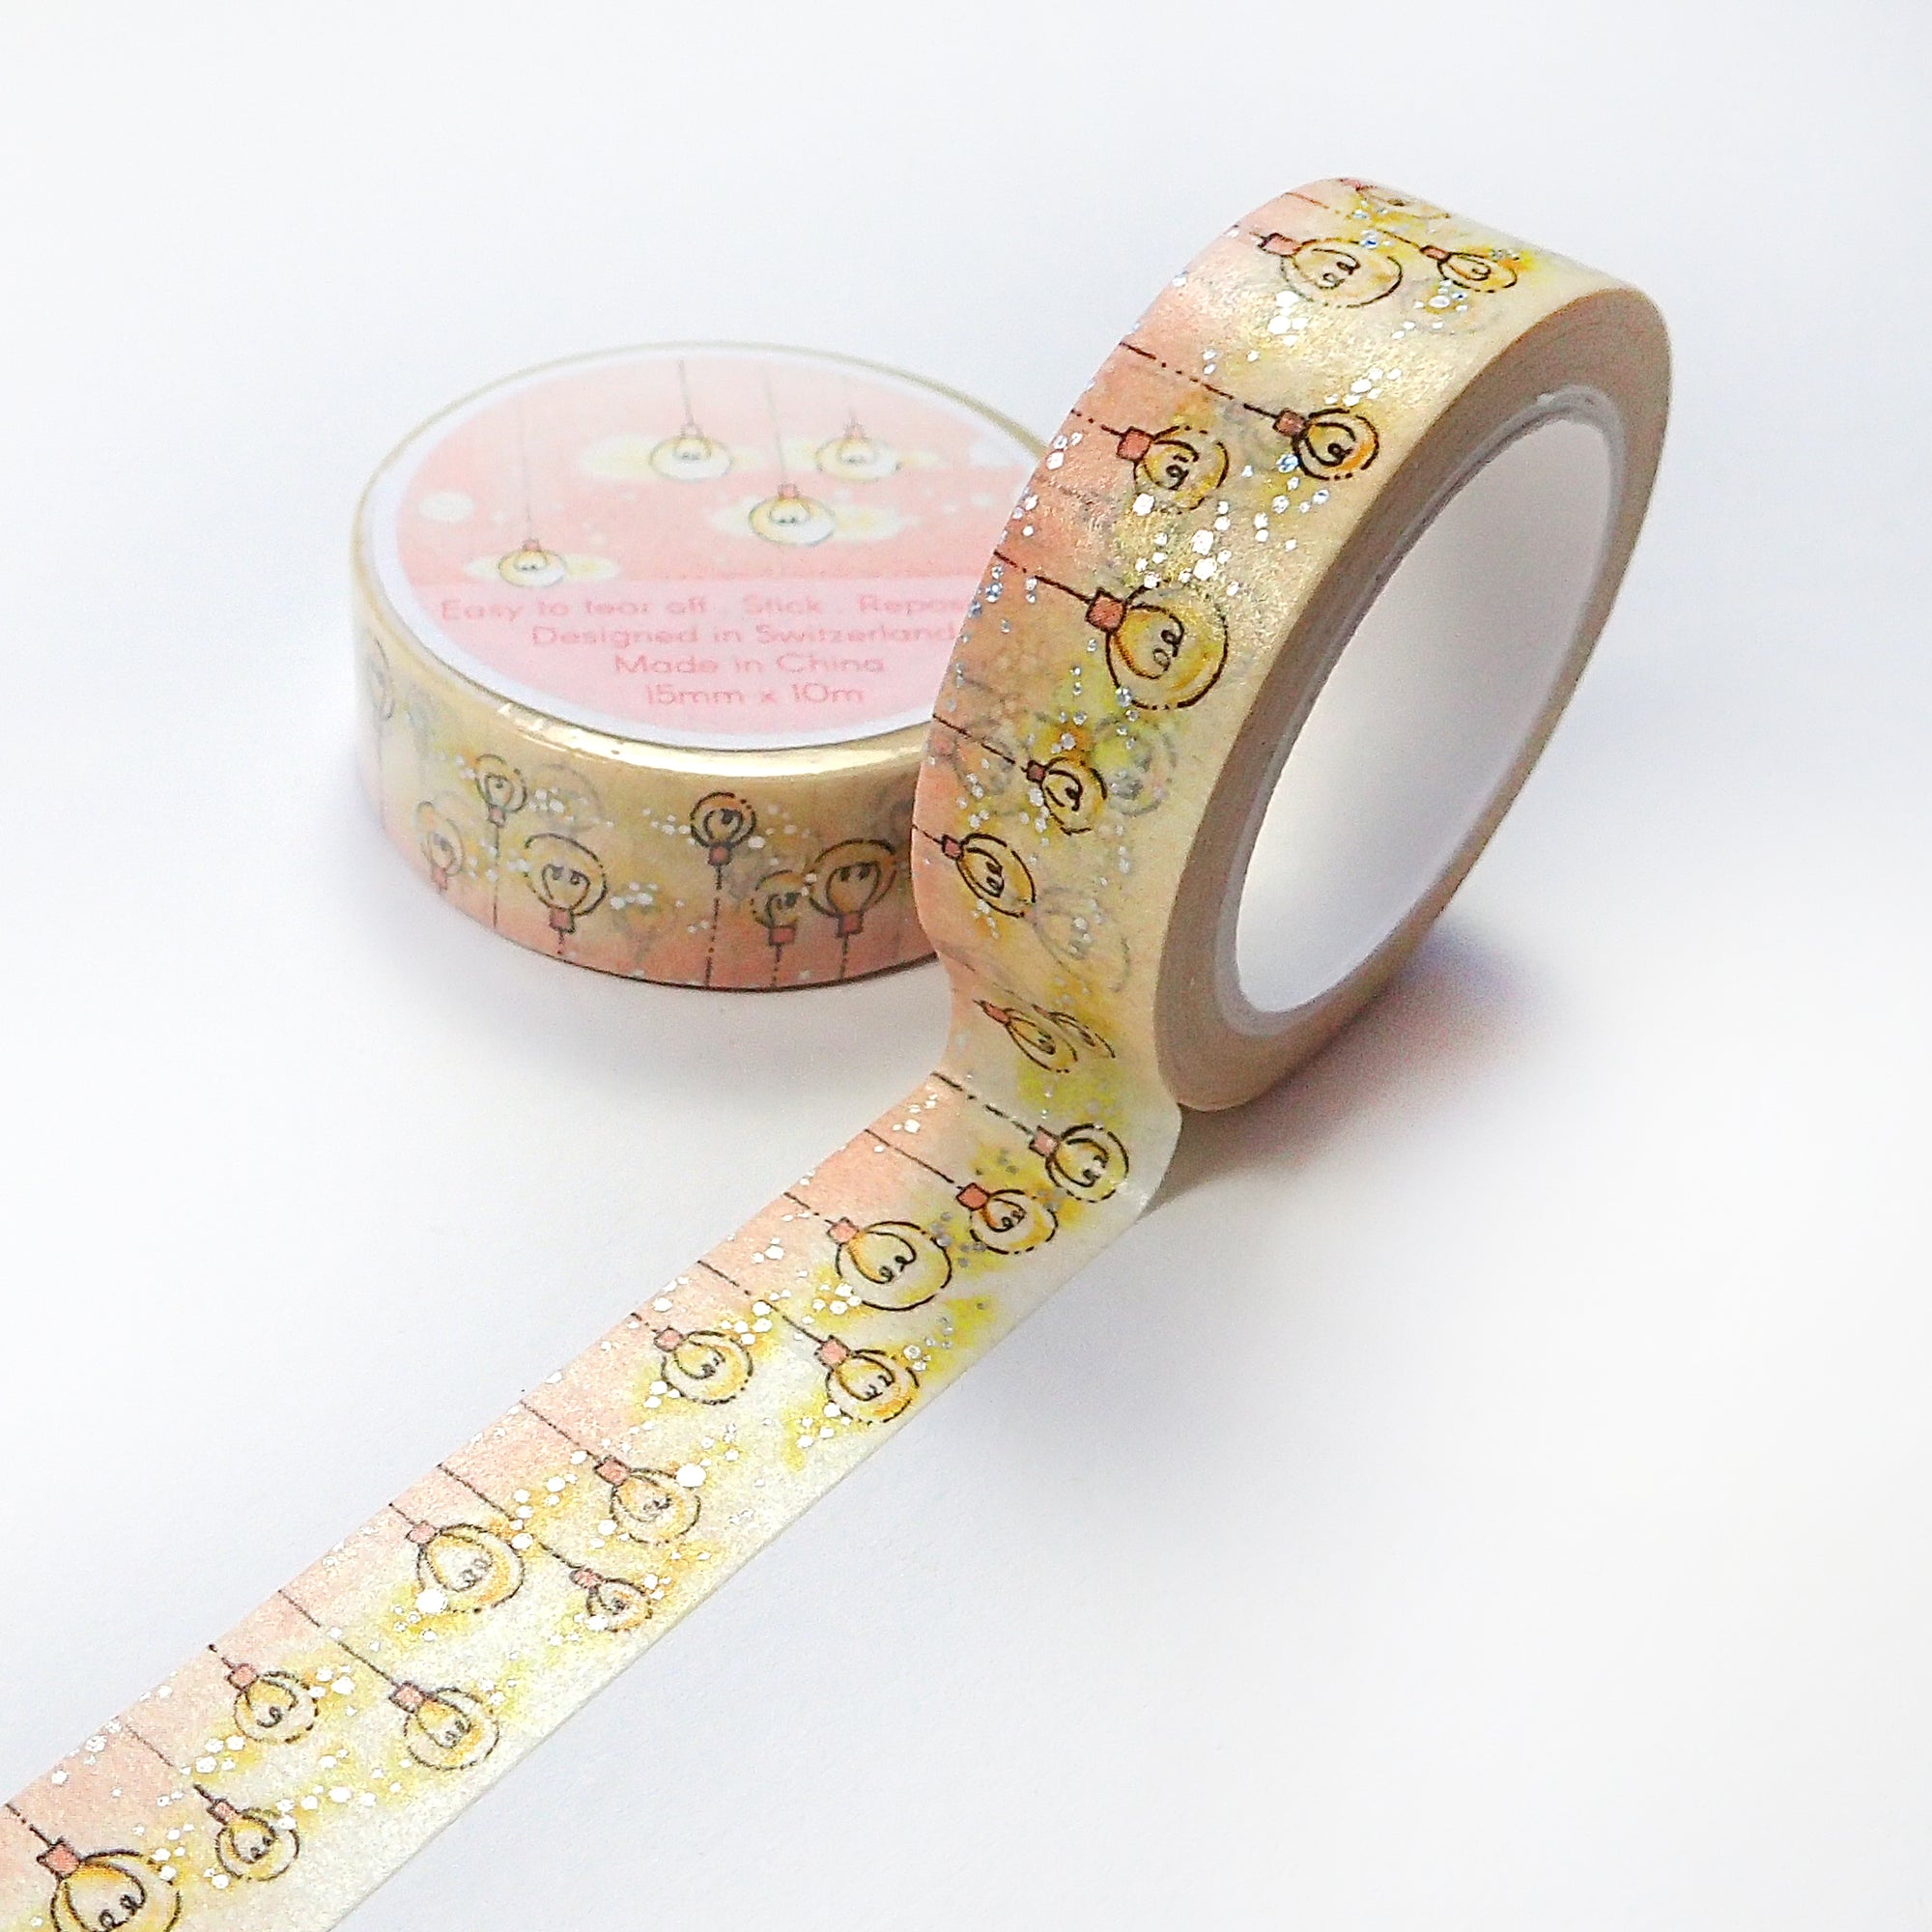 Hand designed watercolor washi tape with light bubbles